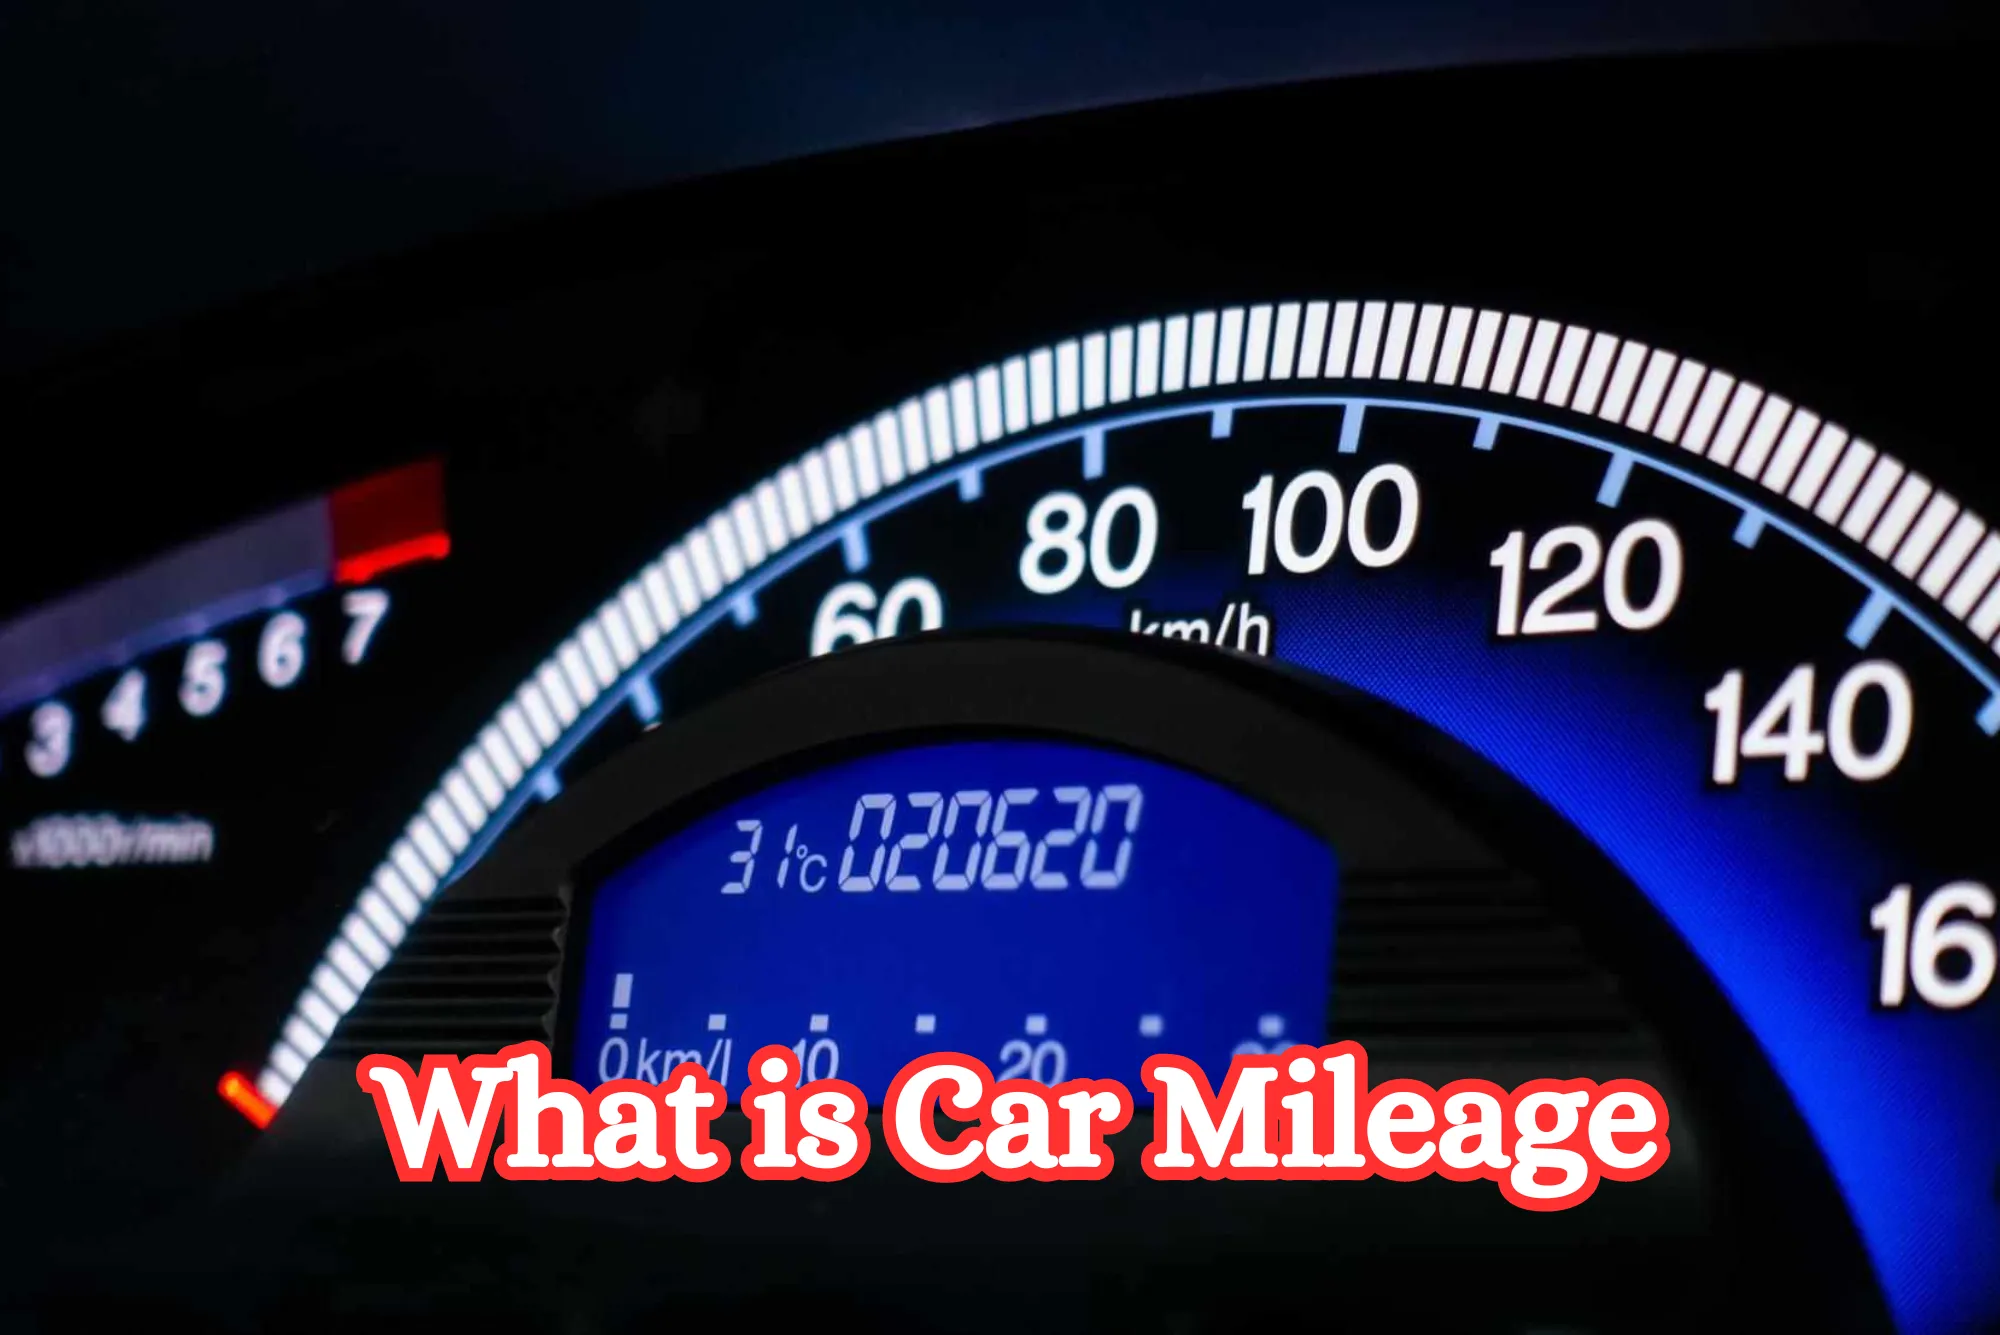 What is Car Mileage